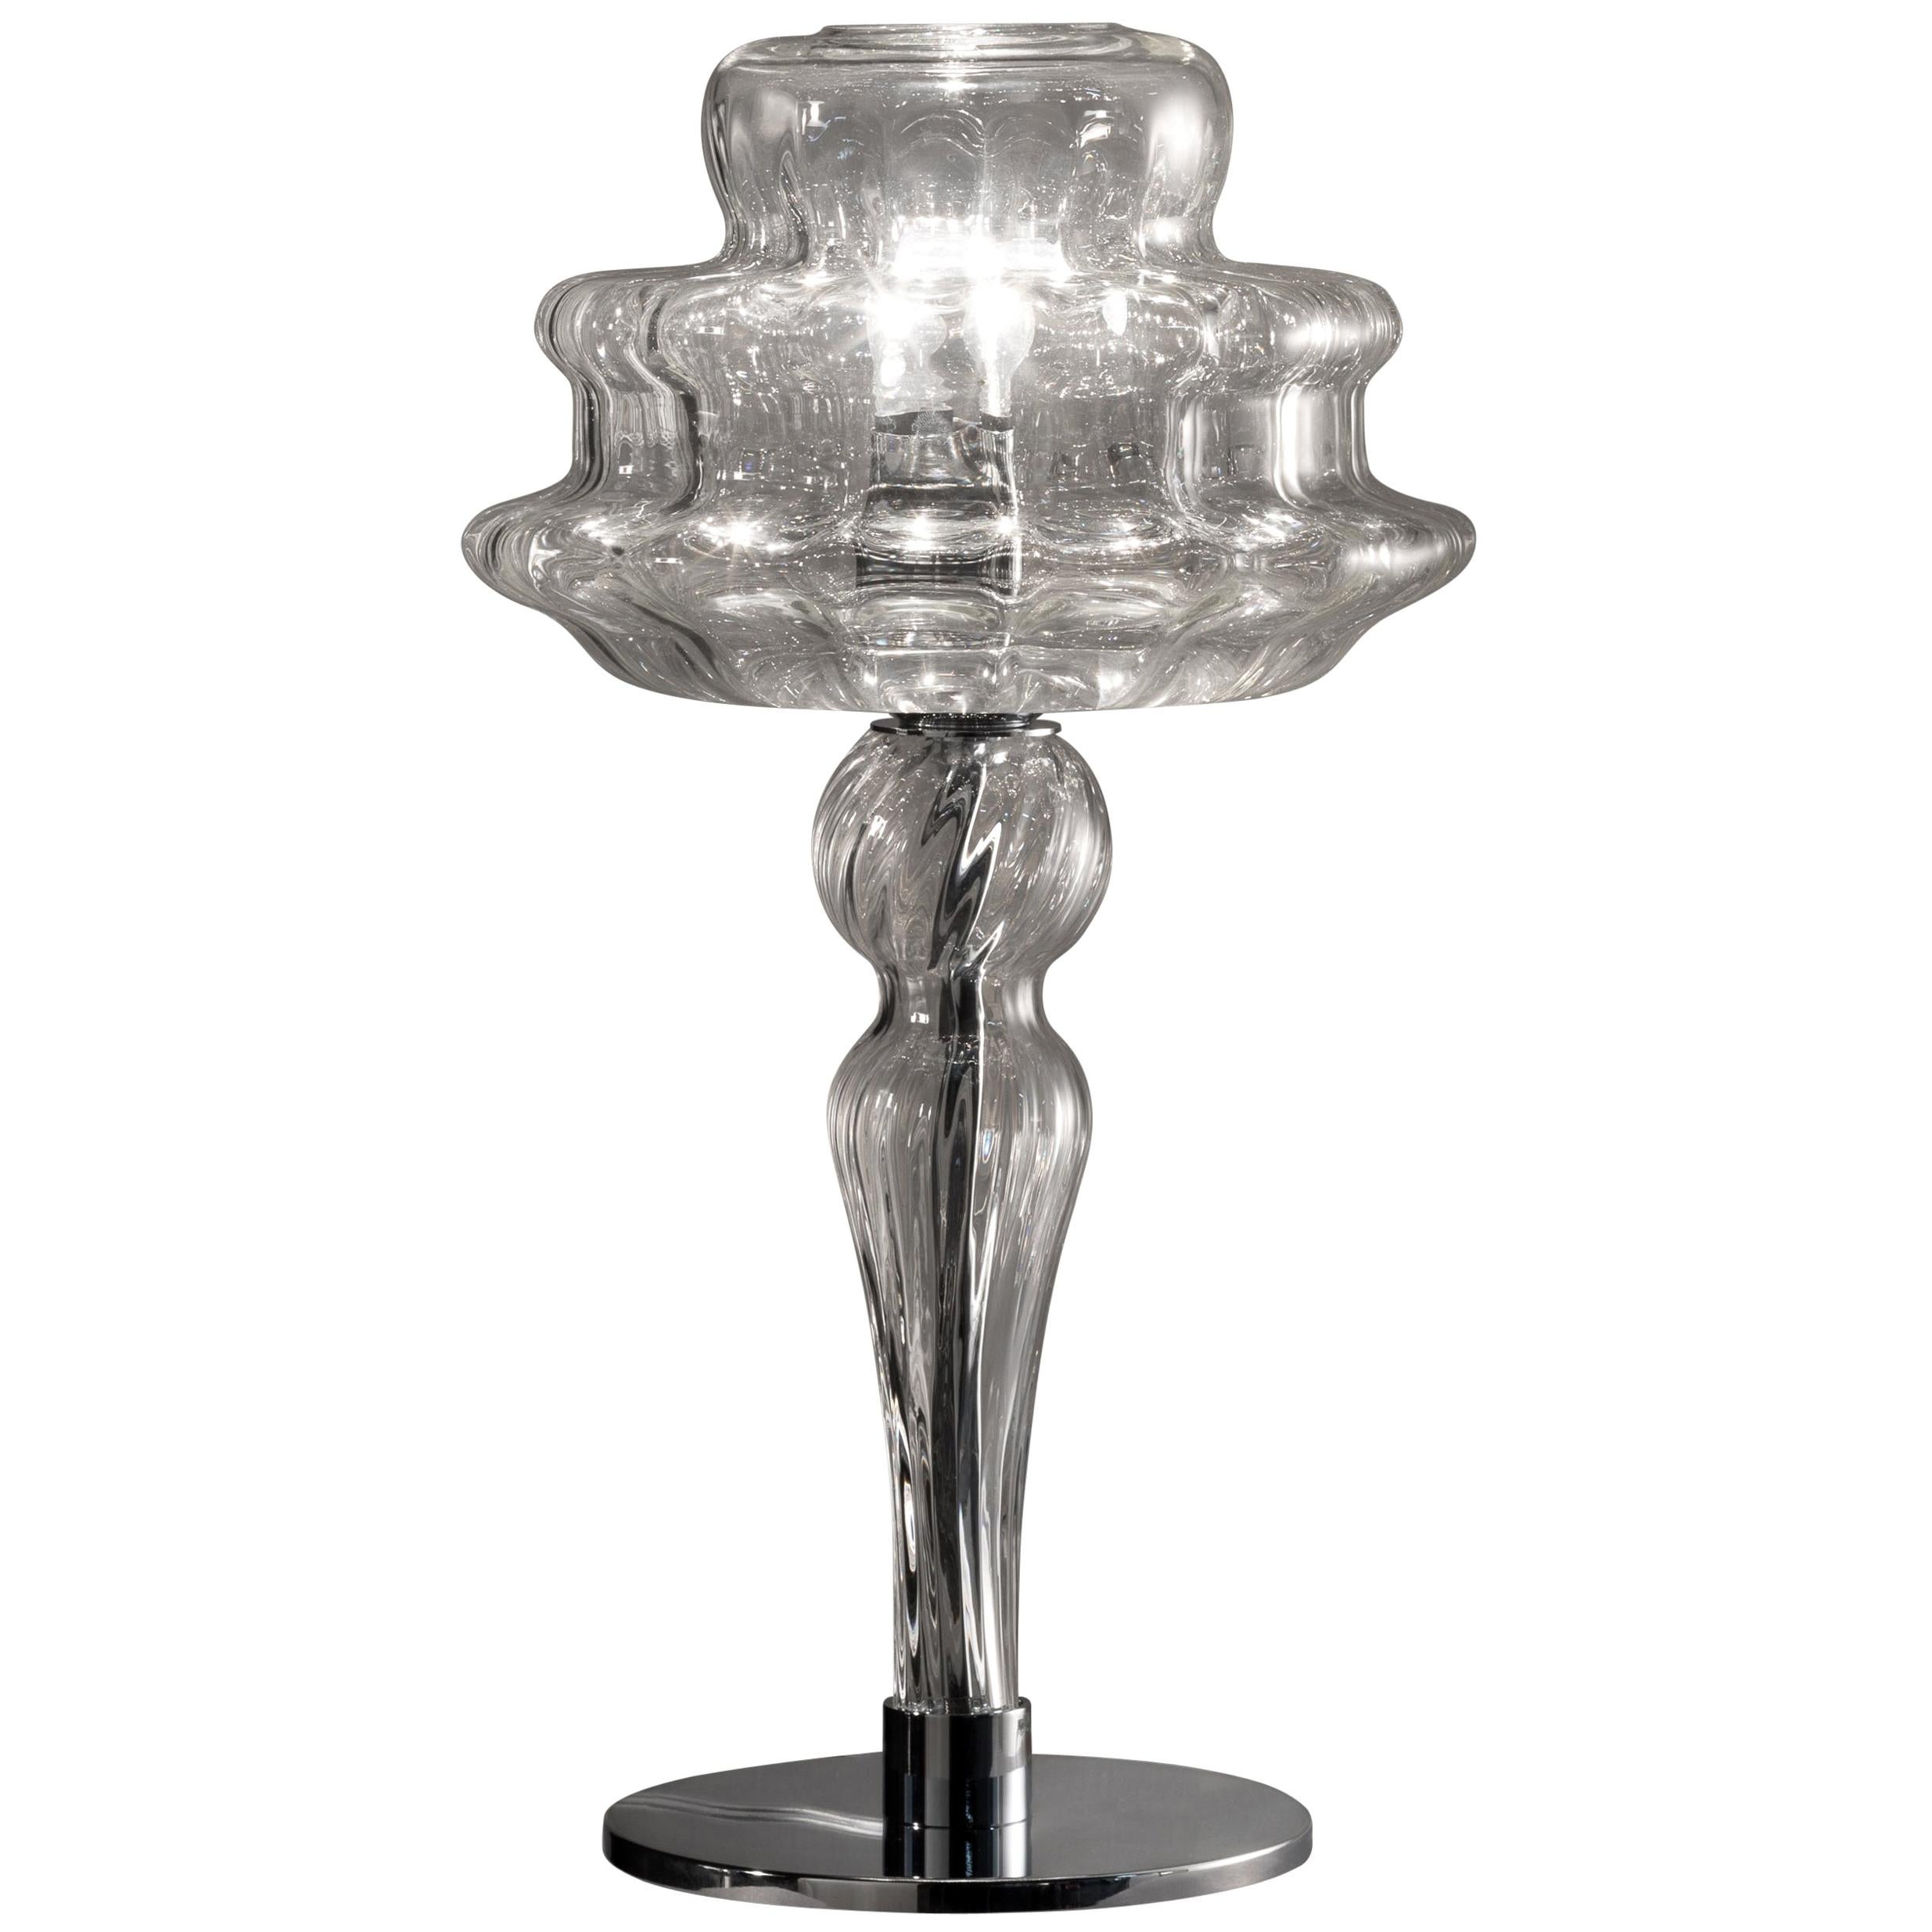 Vistosi Novecento LT Table Lamp in Crystal Striped by Romani Saccani For Sale